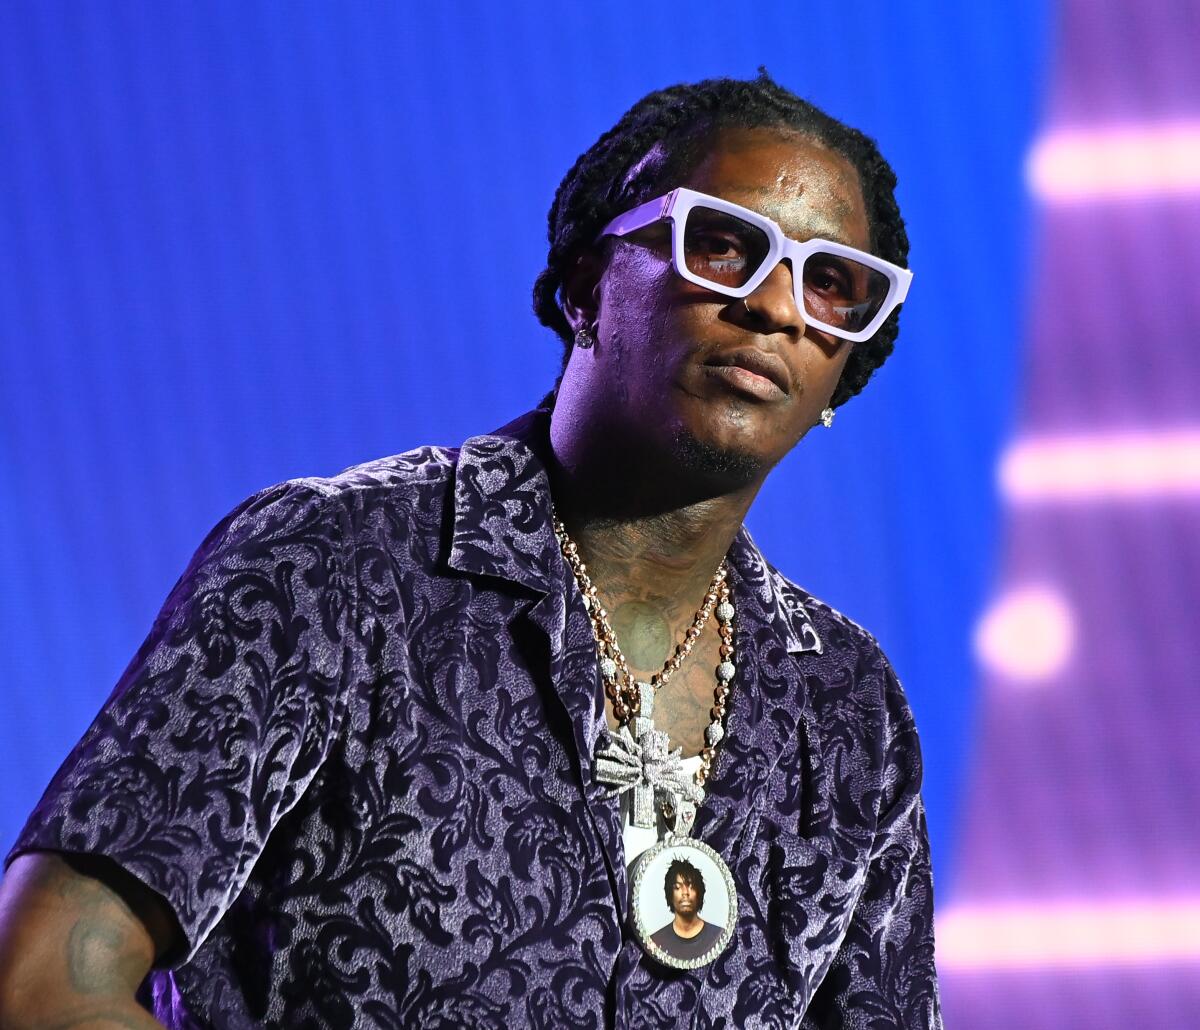 Young Thug leans forward and looks ahead while clad in thick white glasses, a dark patterned shirt and multiple necklaces